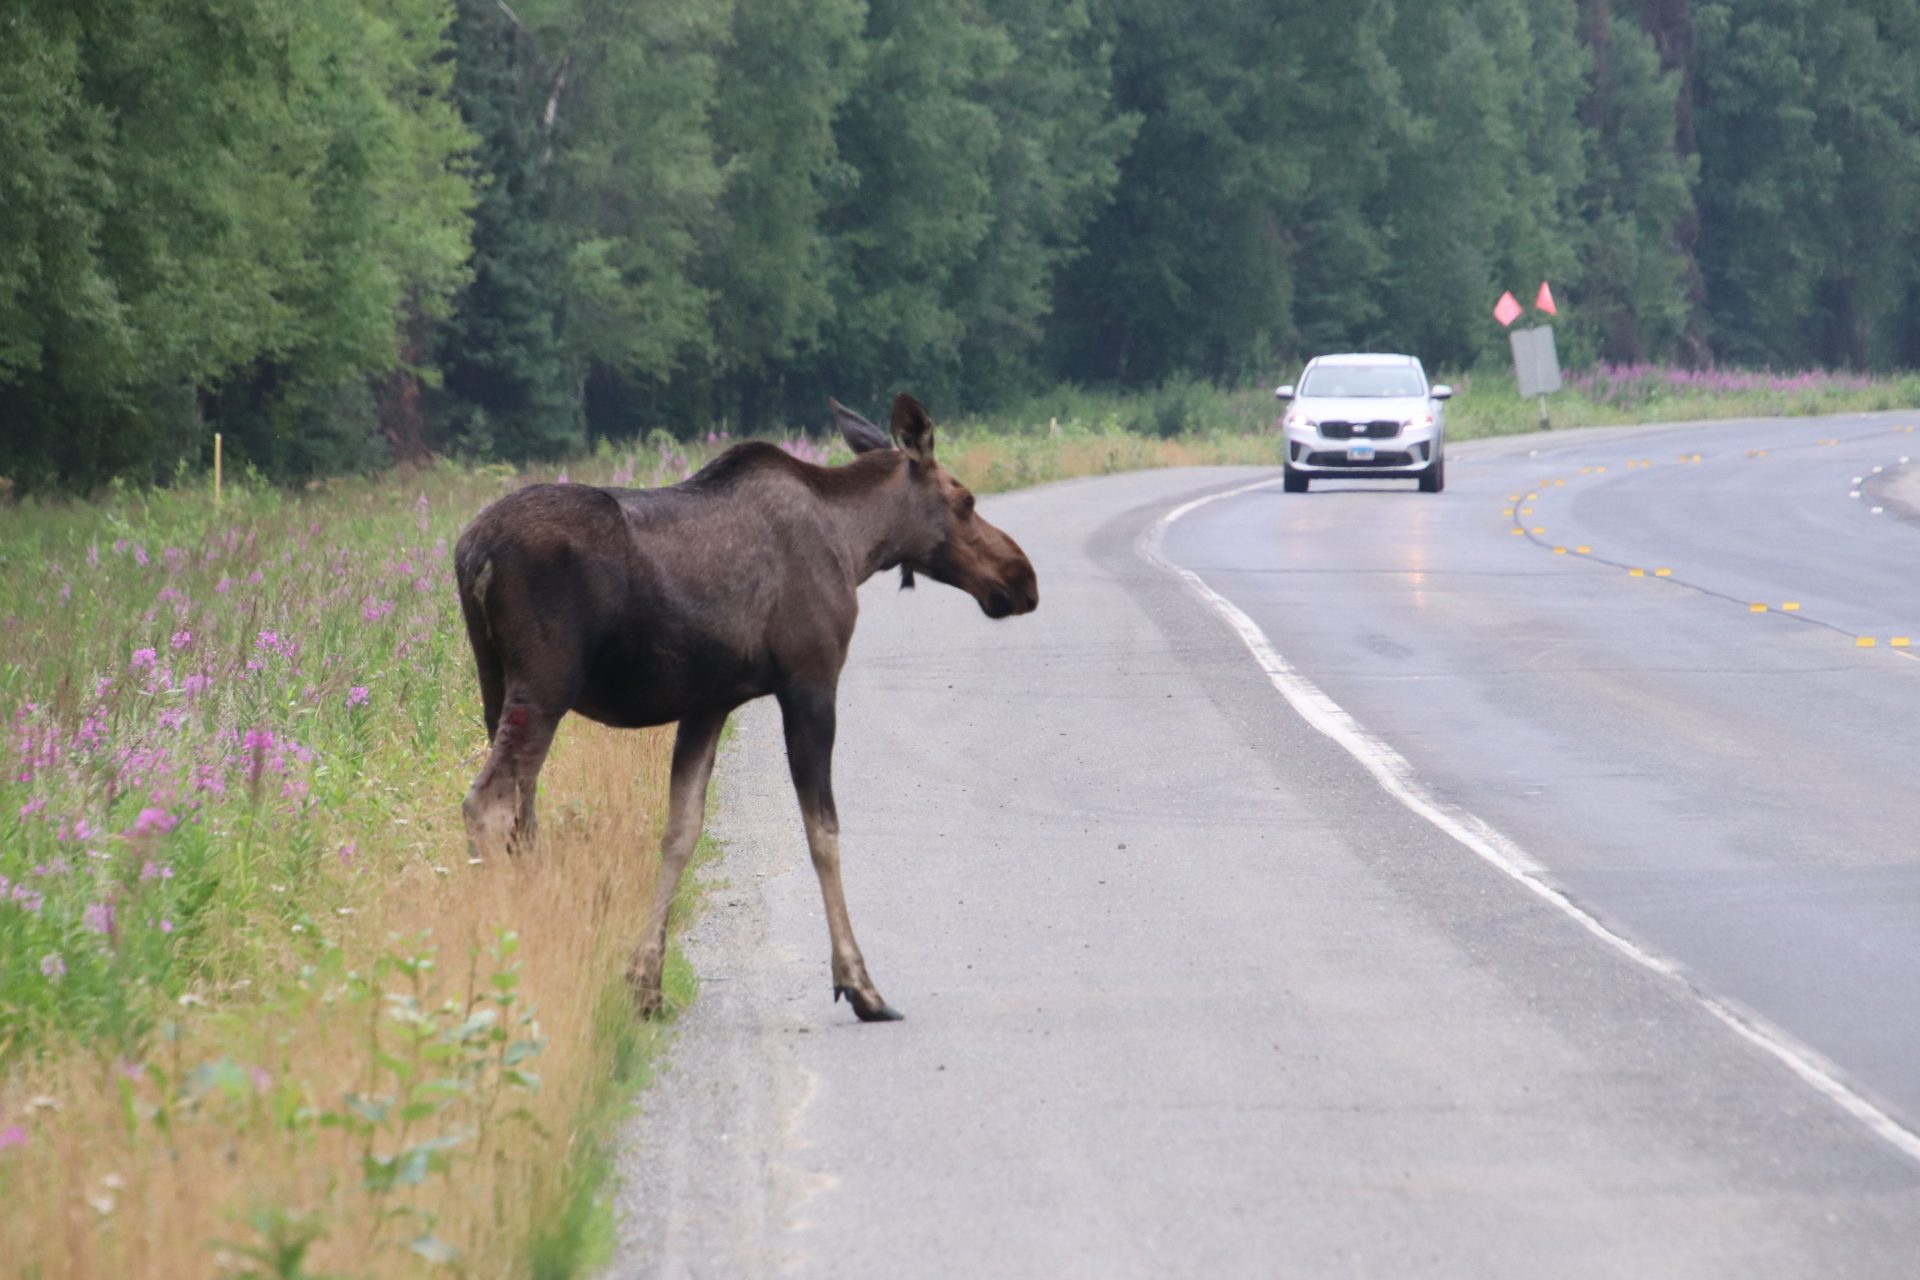 700-pound Moose Relocated After Working Into Traffic, Denting Car